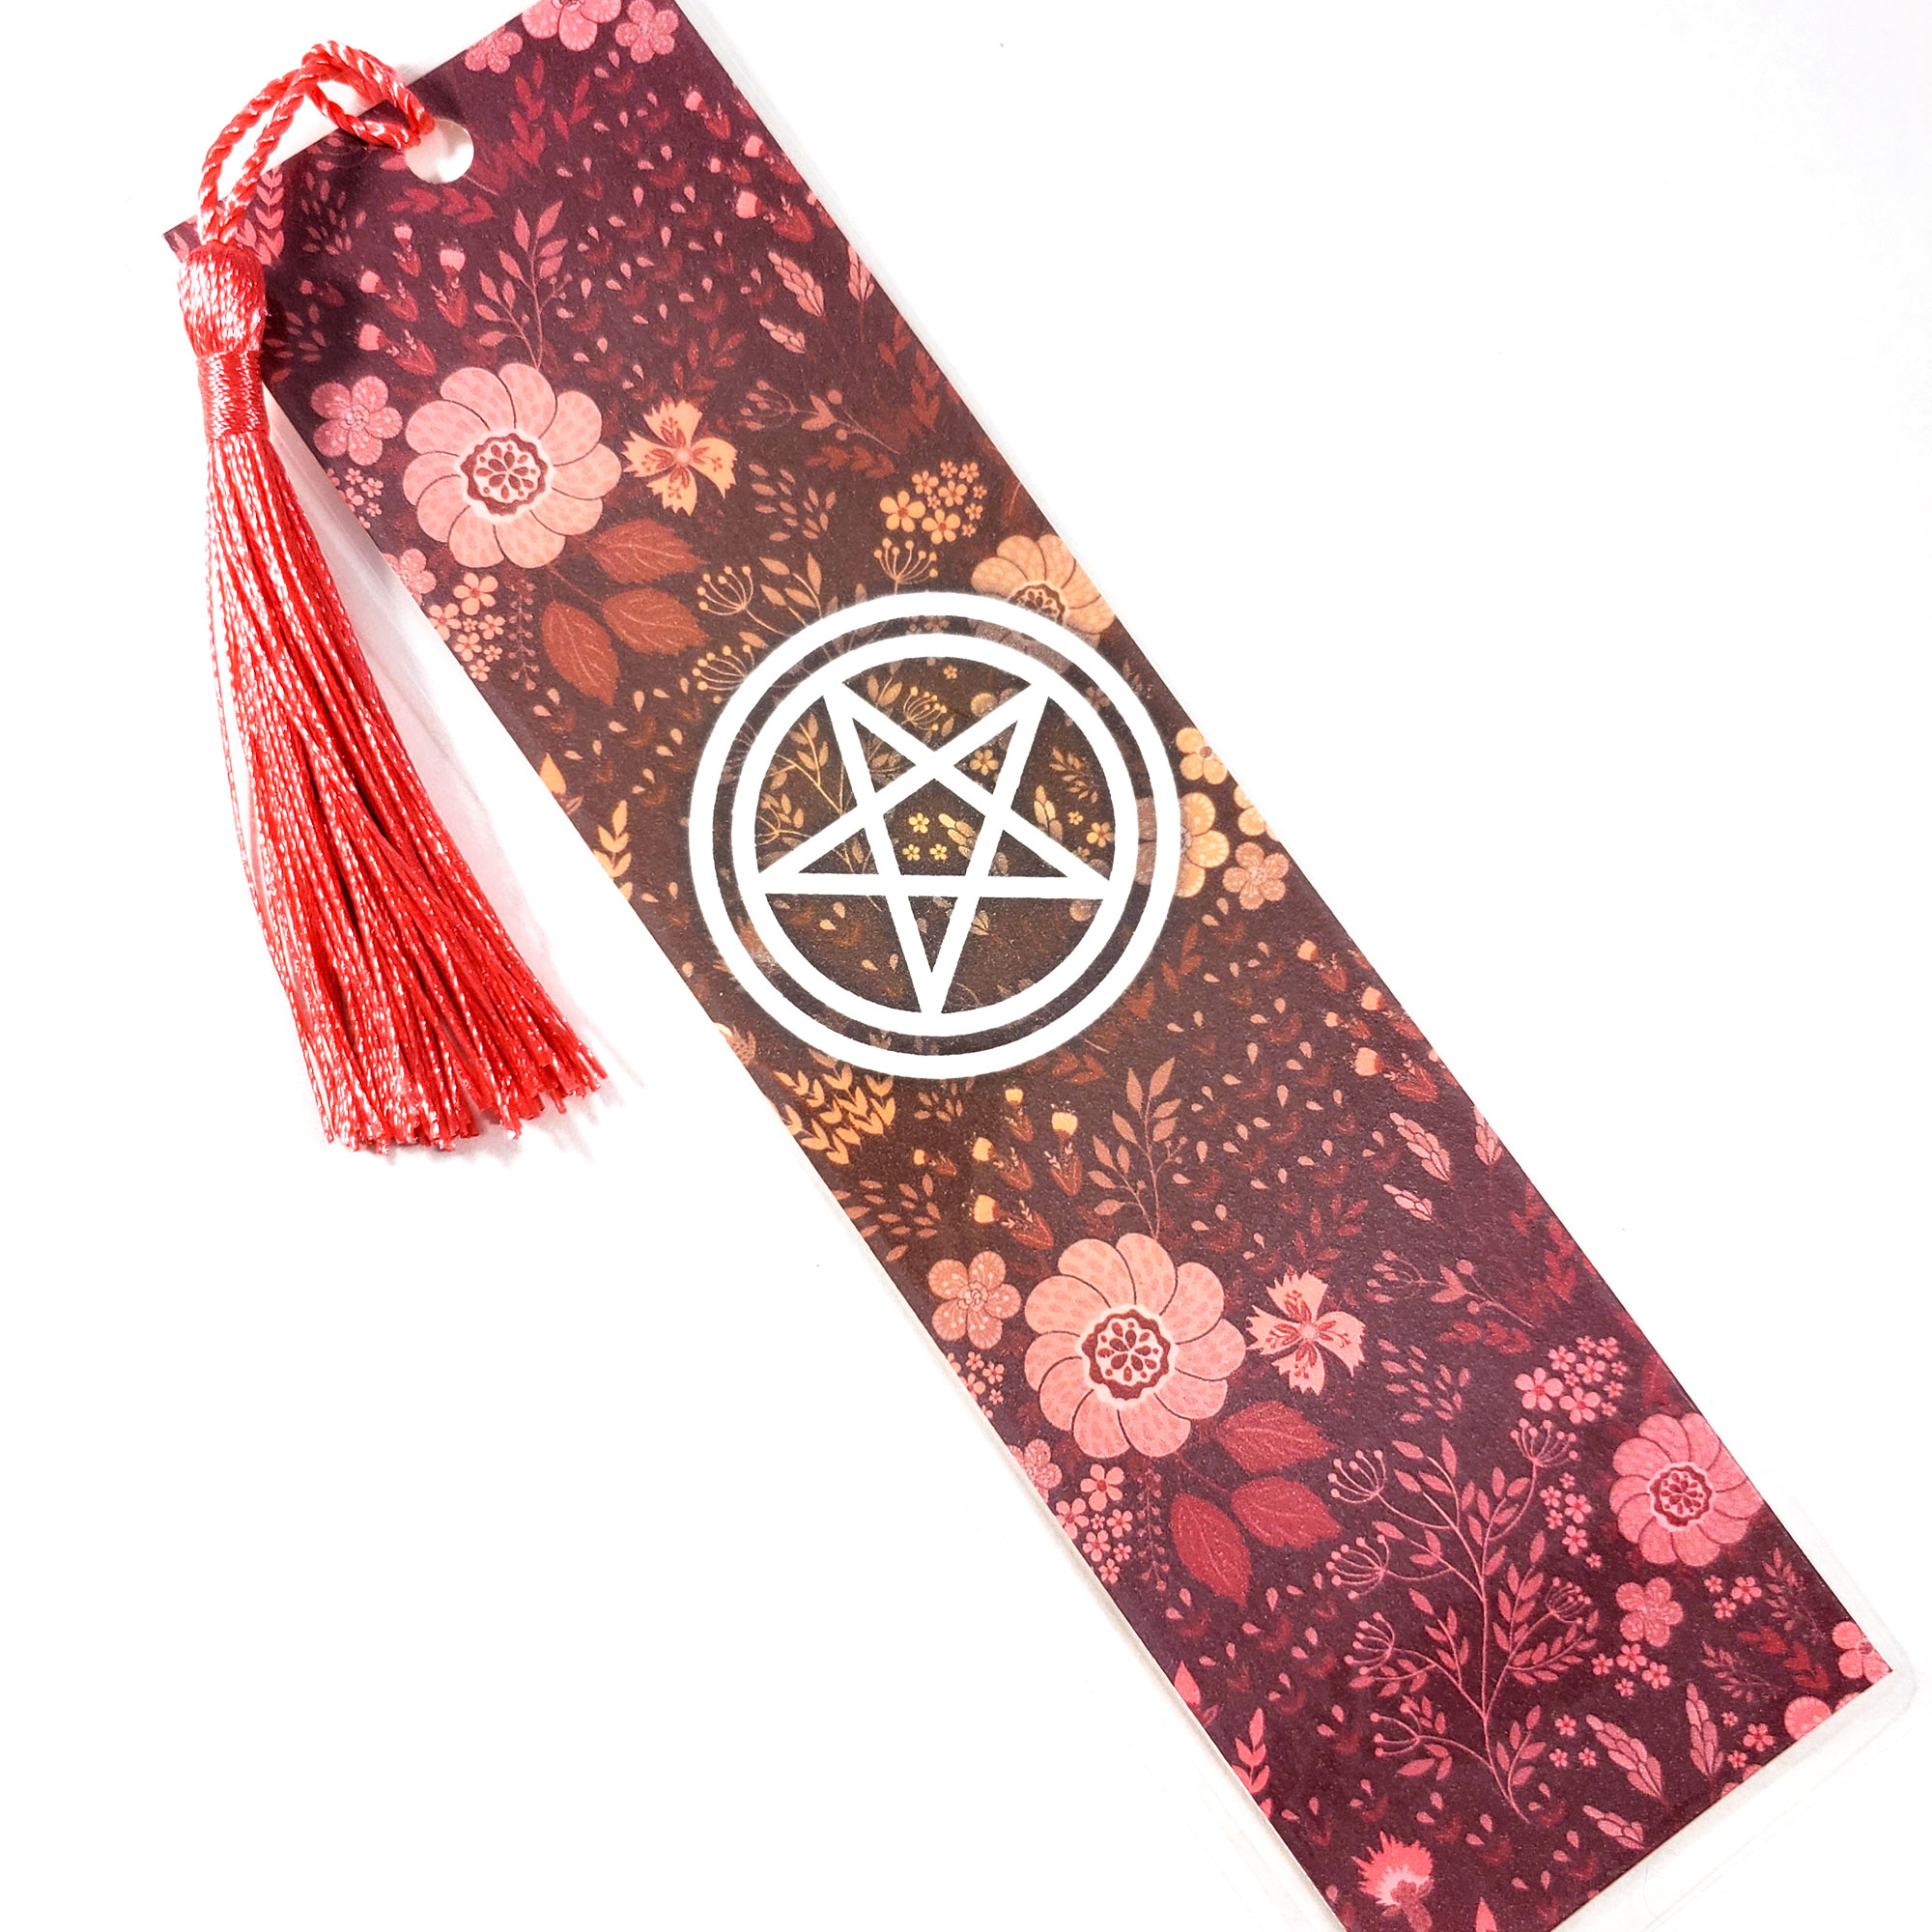 Blessed Be Pretty in Pink Bookmark by Wilde Designs